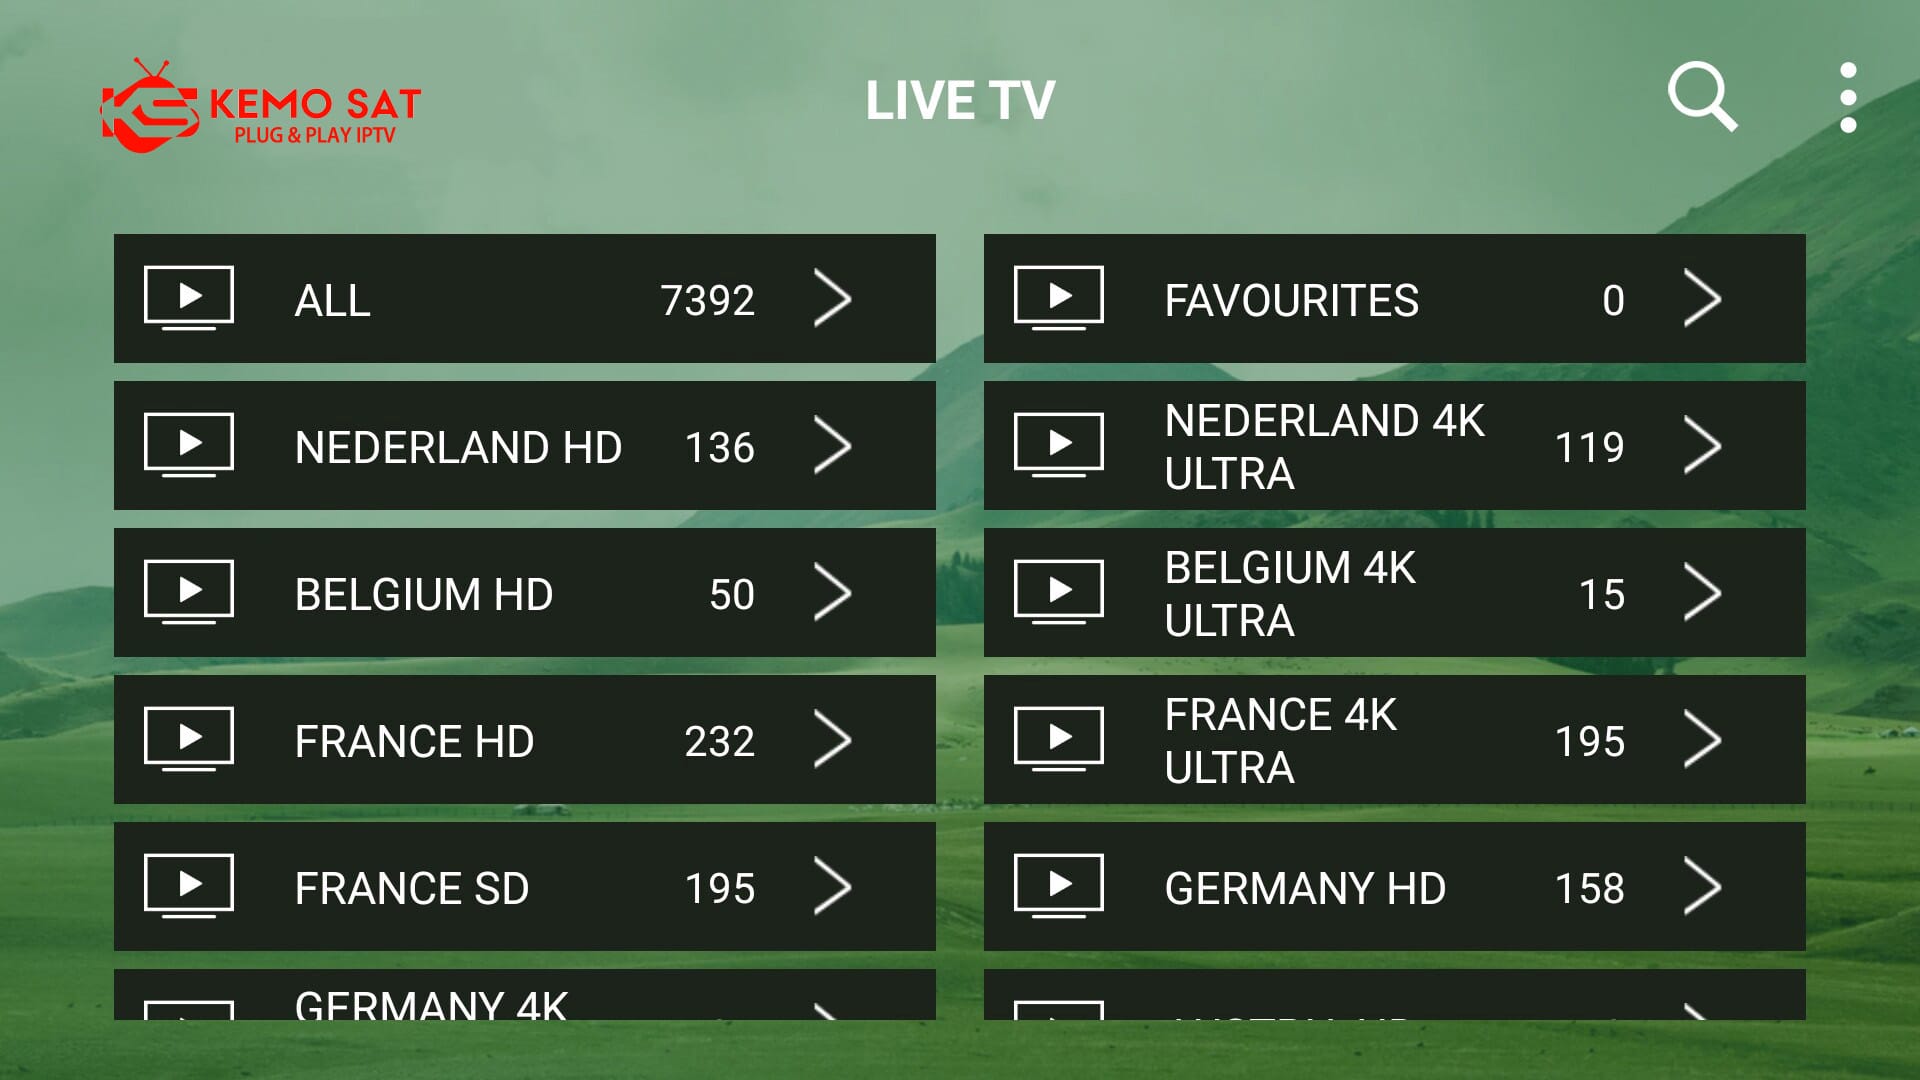 One of the best features of the live TV service is the ability to add channels to favorites.